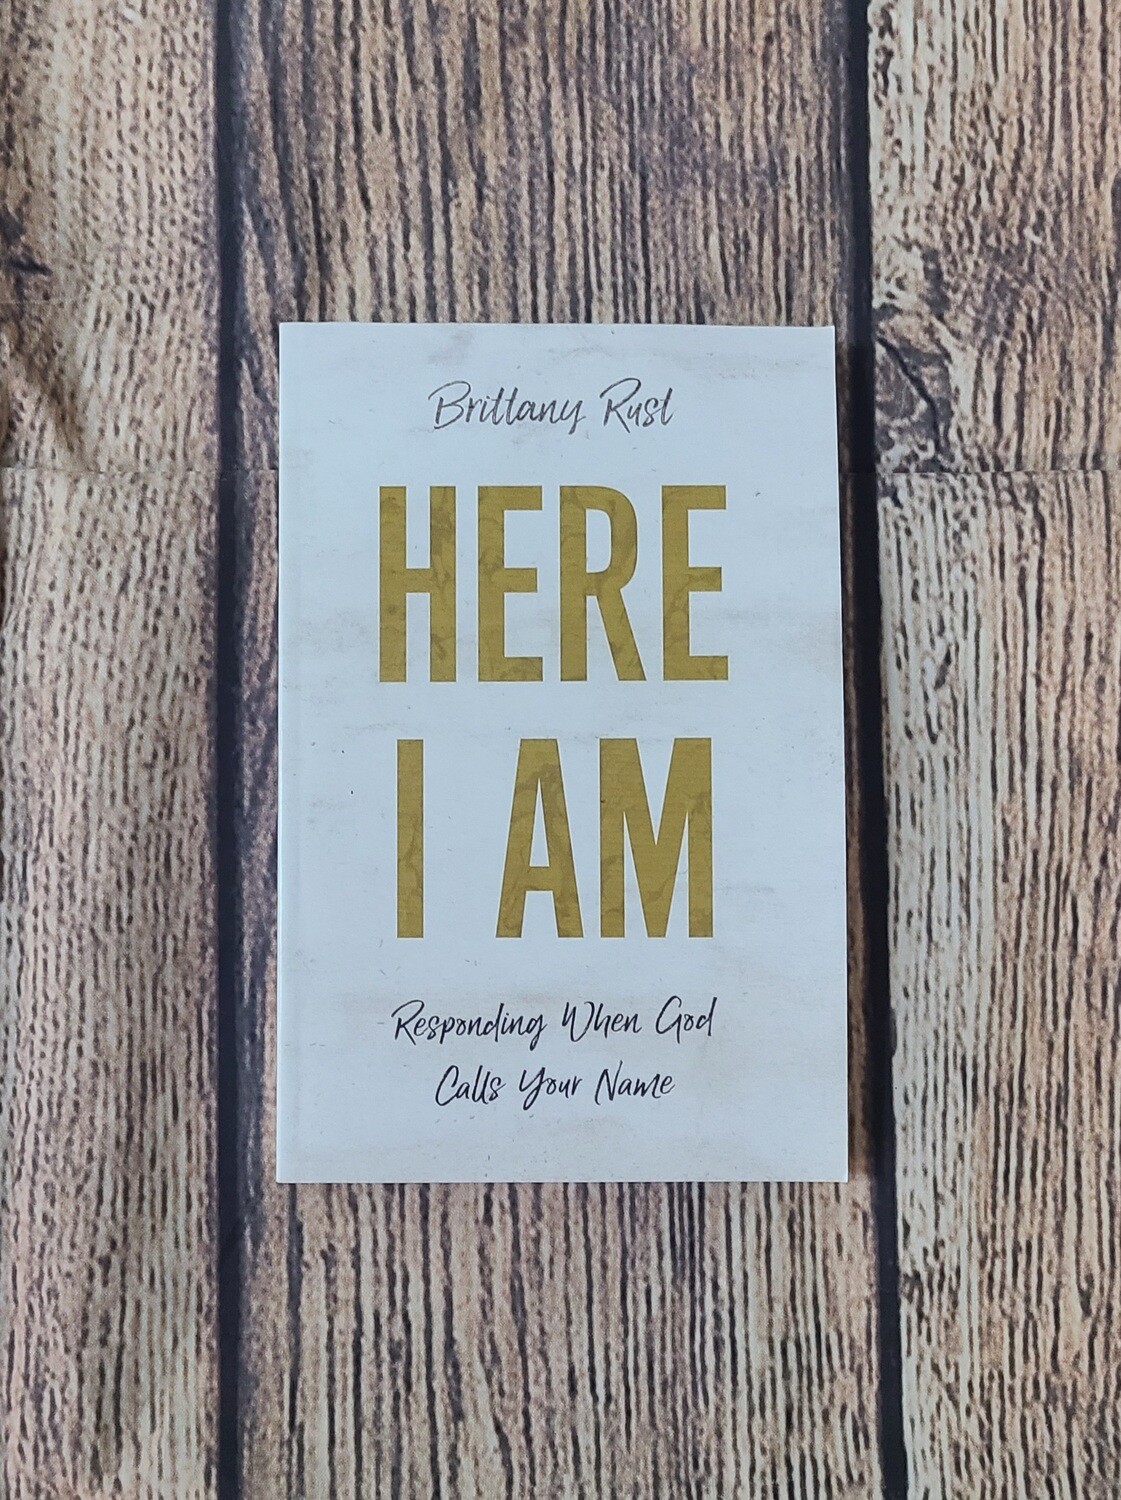 Here I Am: Responding When God Calls Your Name by Brittany Rust